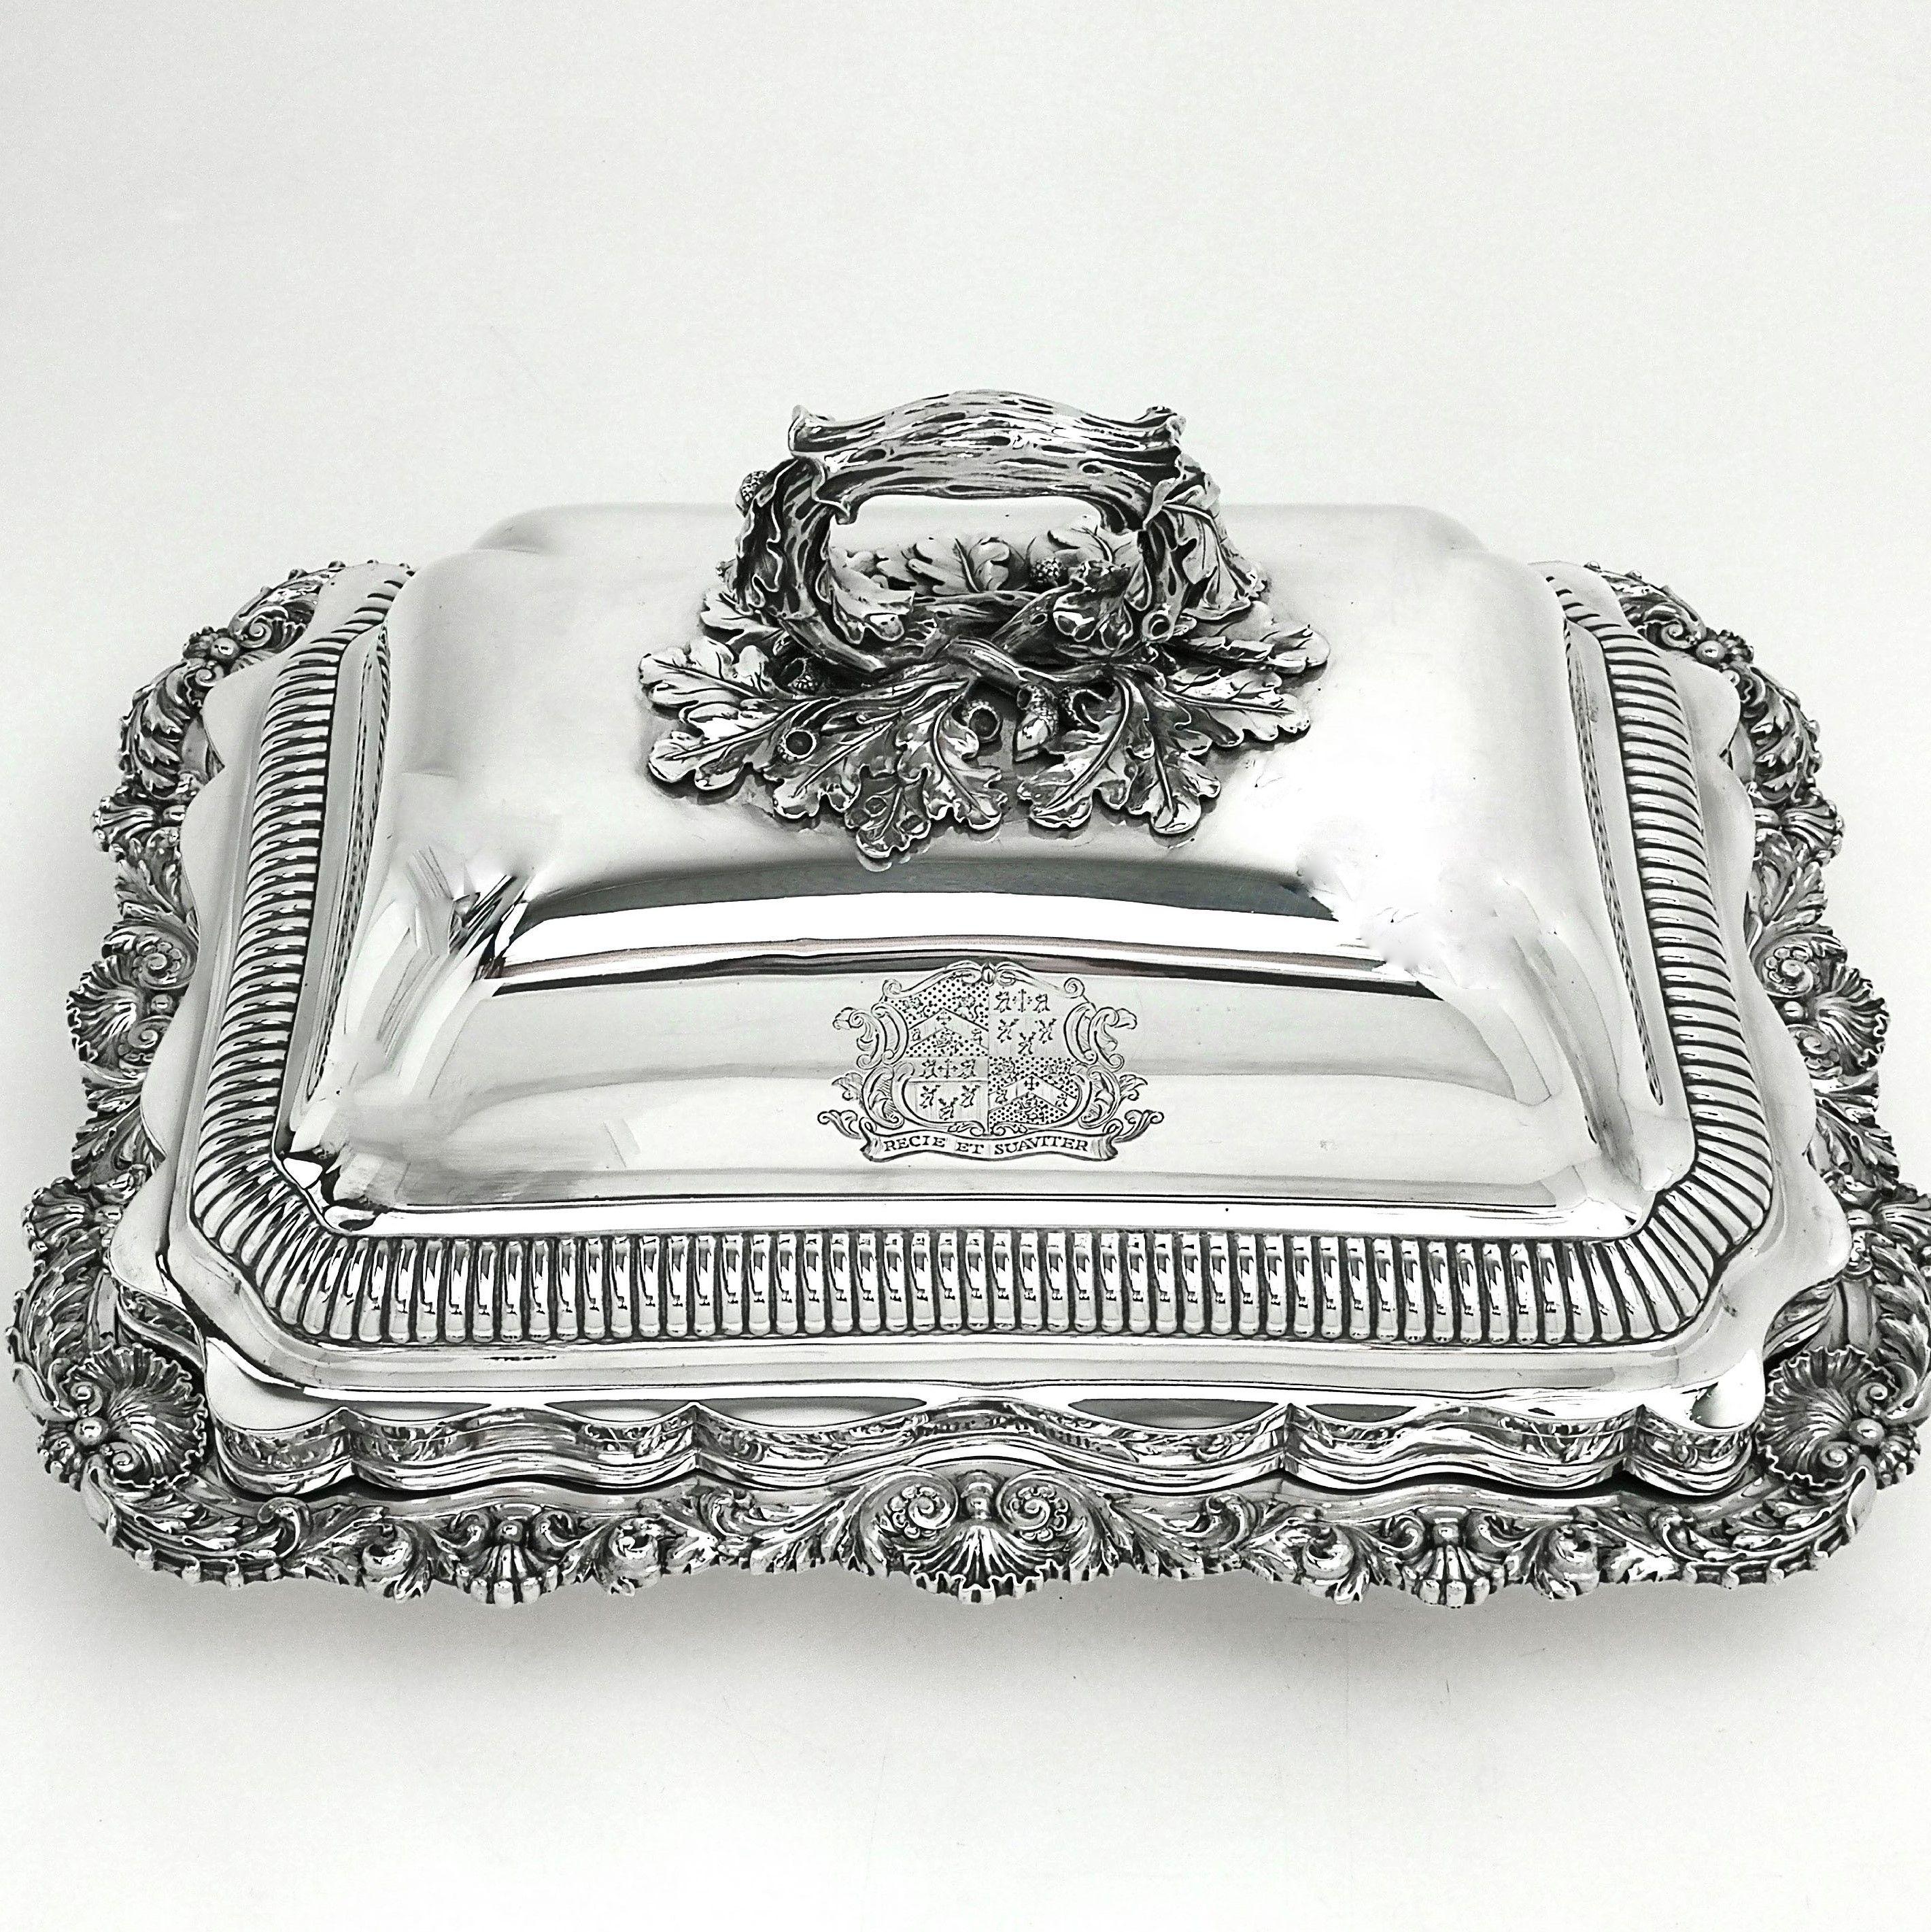 A wonderful Paul Storr Georgian Silver Entree Dish with a shell and foliate border on the base Dish. The Entree Dish has an impressive domed lid with a large handle in the shape of a bent branch and leaves.The Lid has a Crest engraved on the one